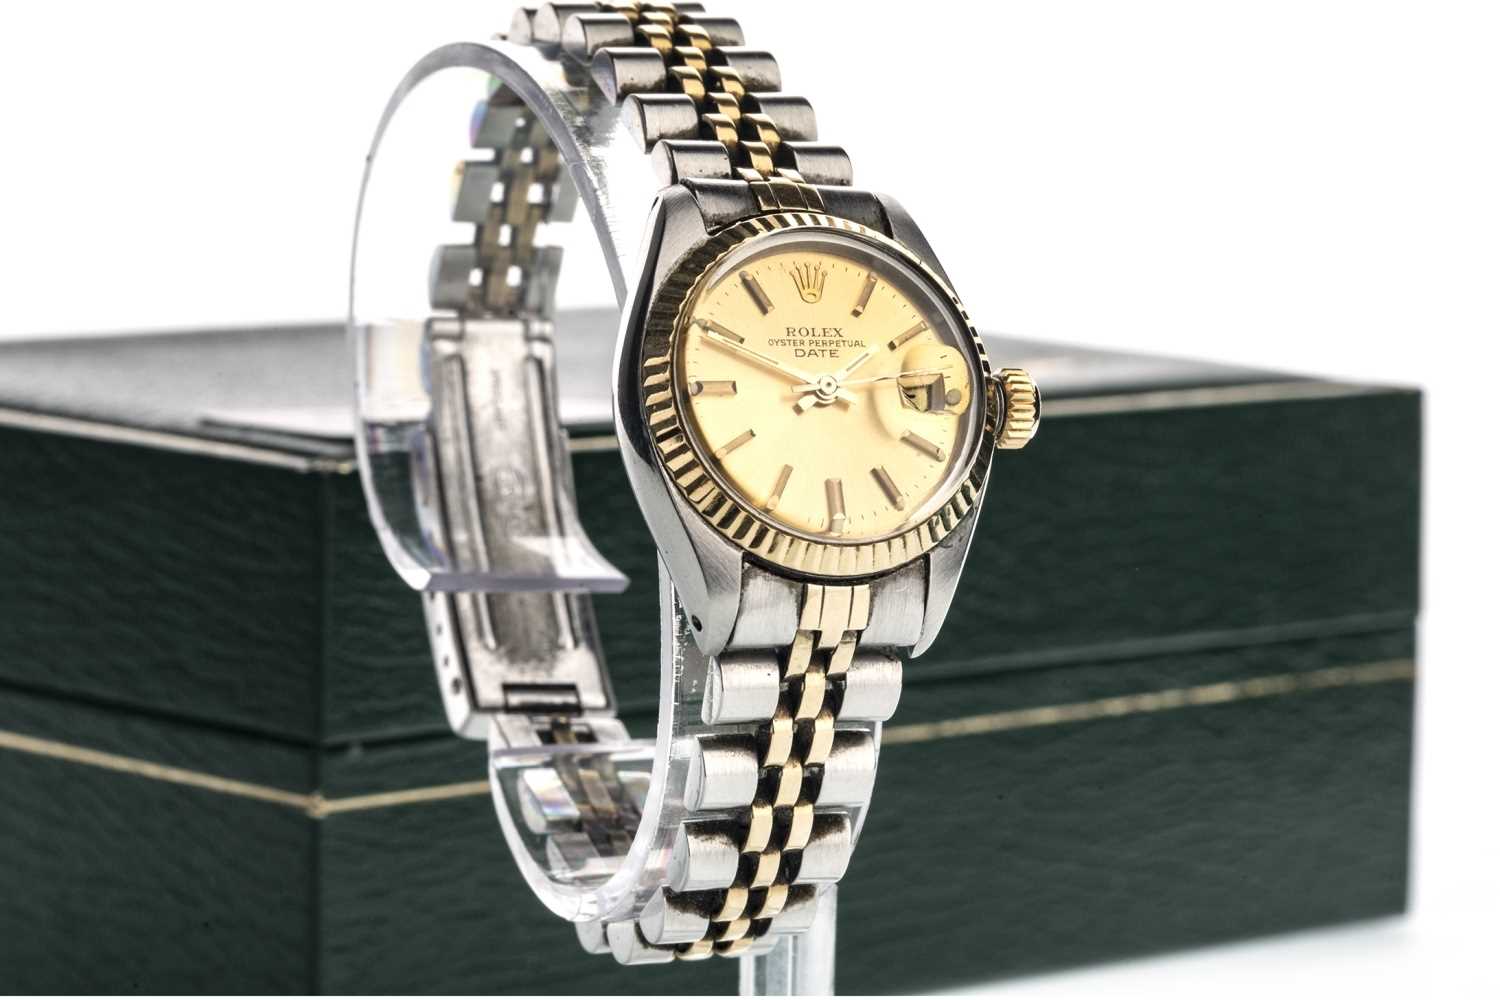 Lot 855 - A LADY'S ROLEX OYSTER PERPETUAL DATE STAINLESS STEEL BI COLOUR AUTOMATIC WRIST WATCH